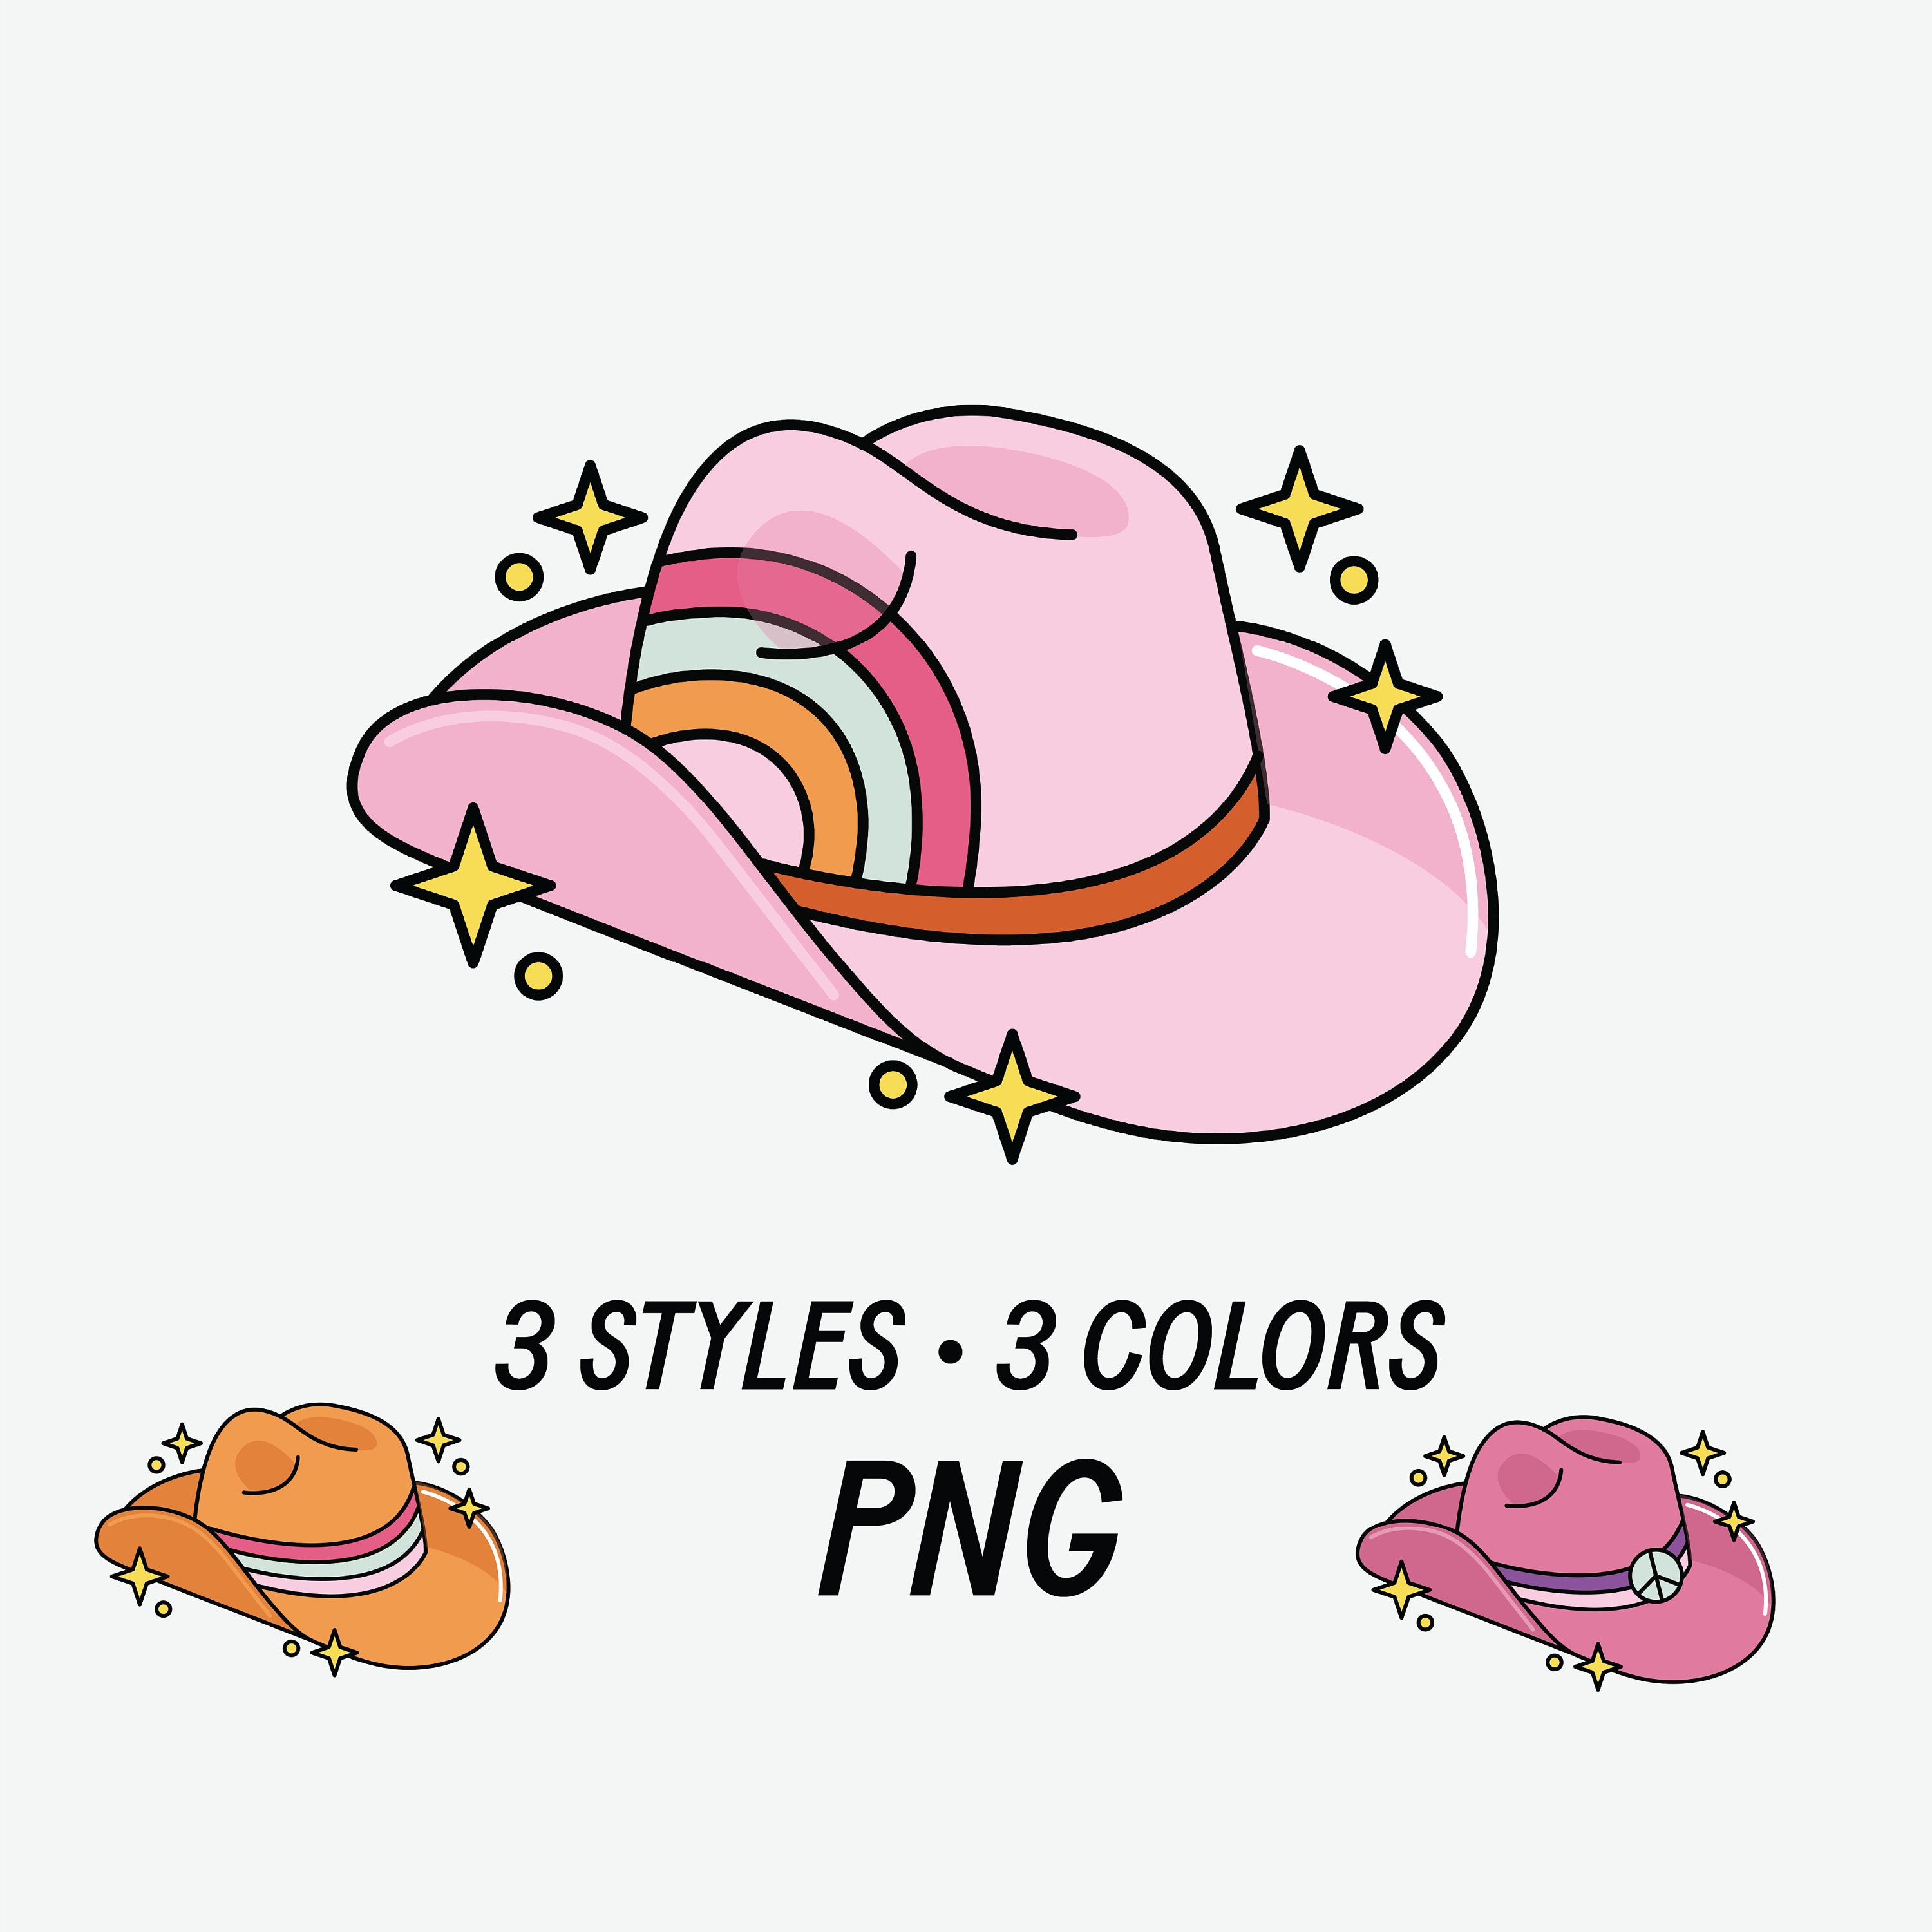 Let's Go Girls | Pink Cowboy Cowgirl Rodeo Hat Preppy Aesthetic  Bachelorette Party | HOWDY Y'ALL | White Background | Art Board Print